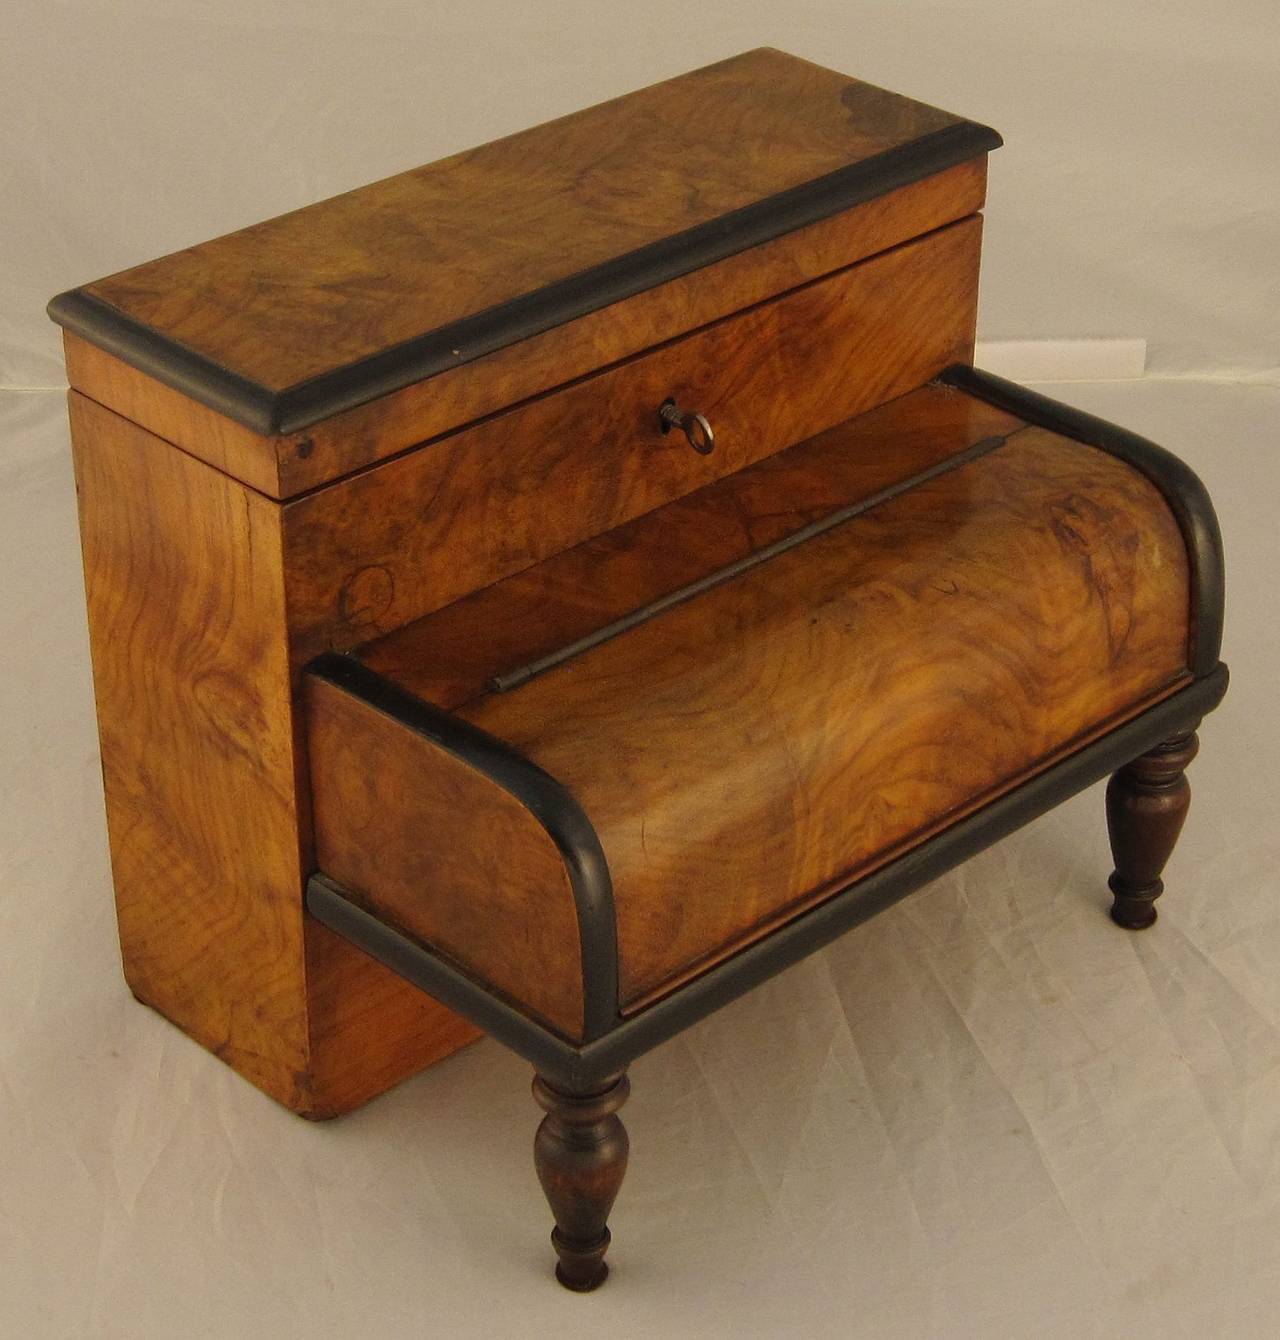 A fine English desk set and stationery box of burled walnut with ebonized accents, in the novelty form of a stand-up piano.
Featuring a stationery box with hinged lid mounted to a moulded compartment with hinged cover, on two turned legs, opening